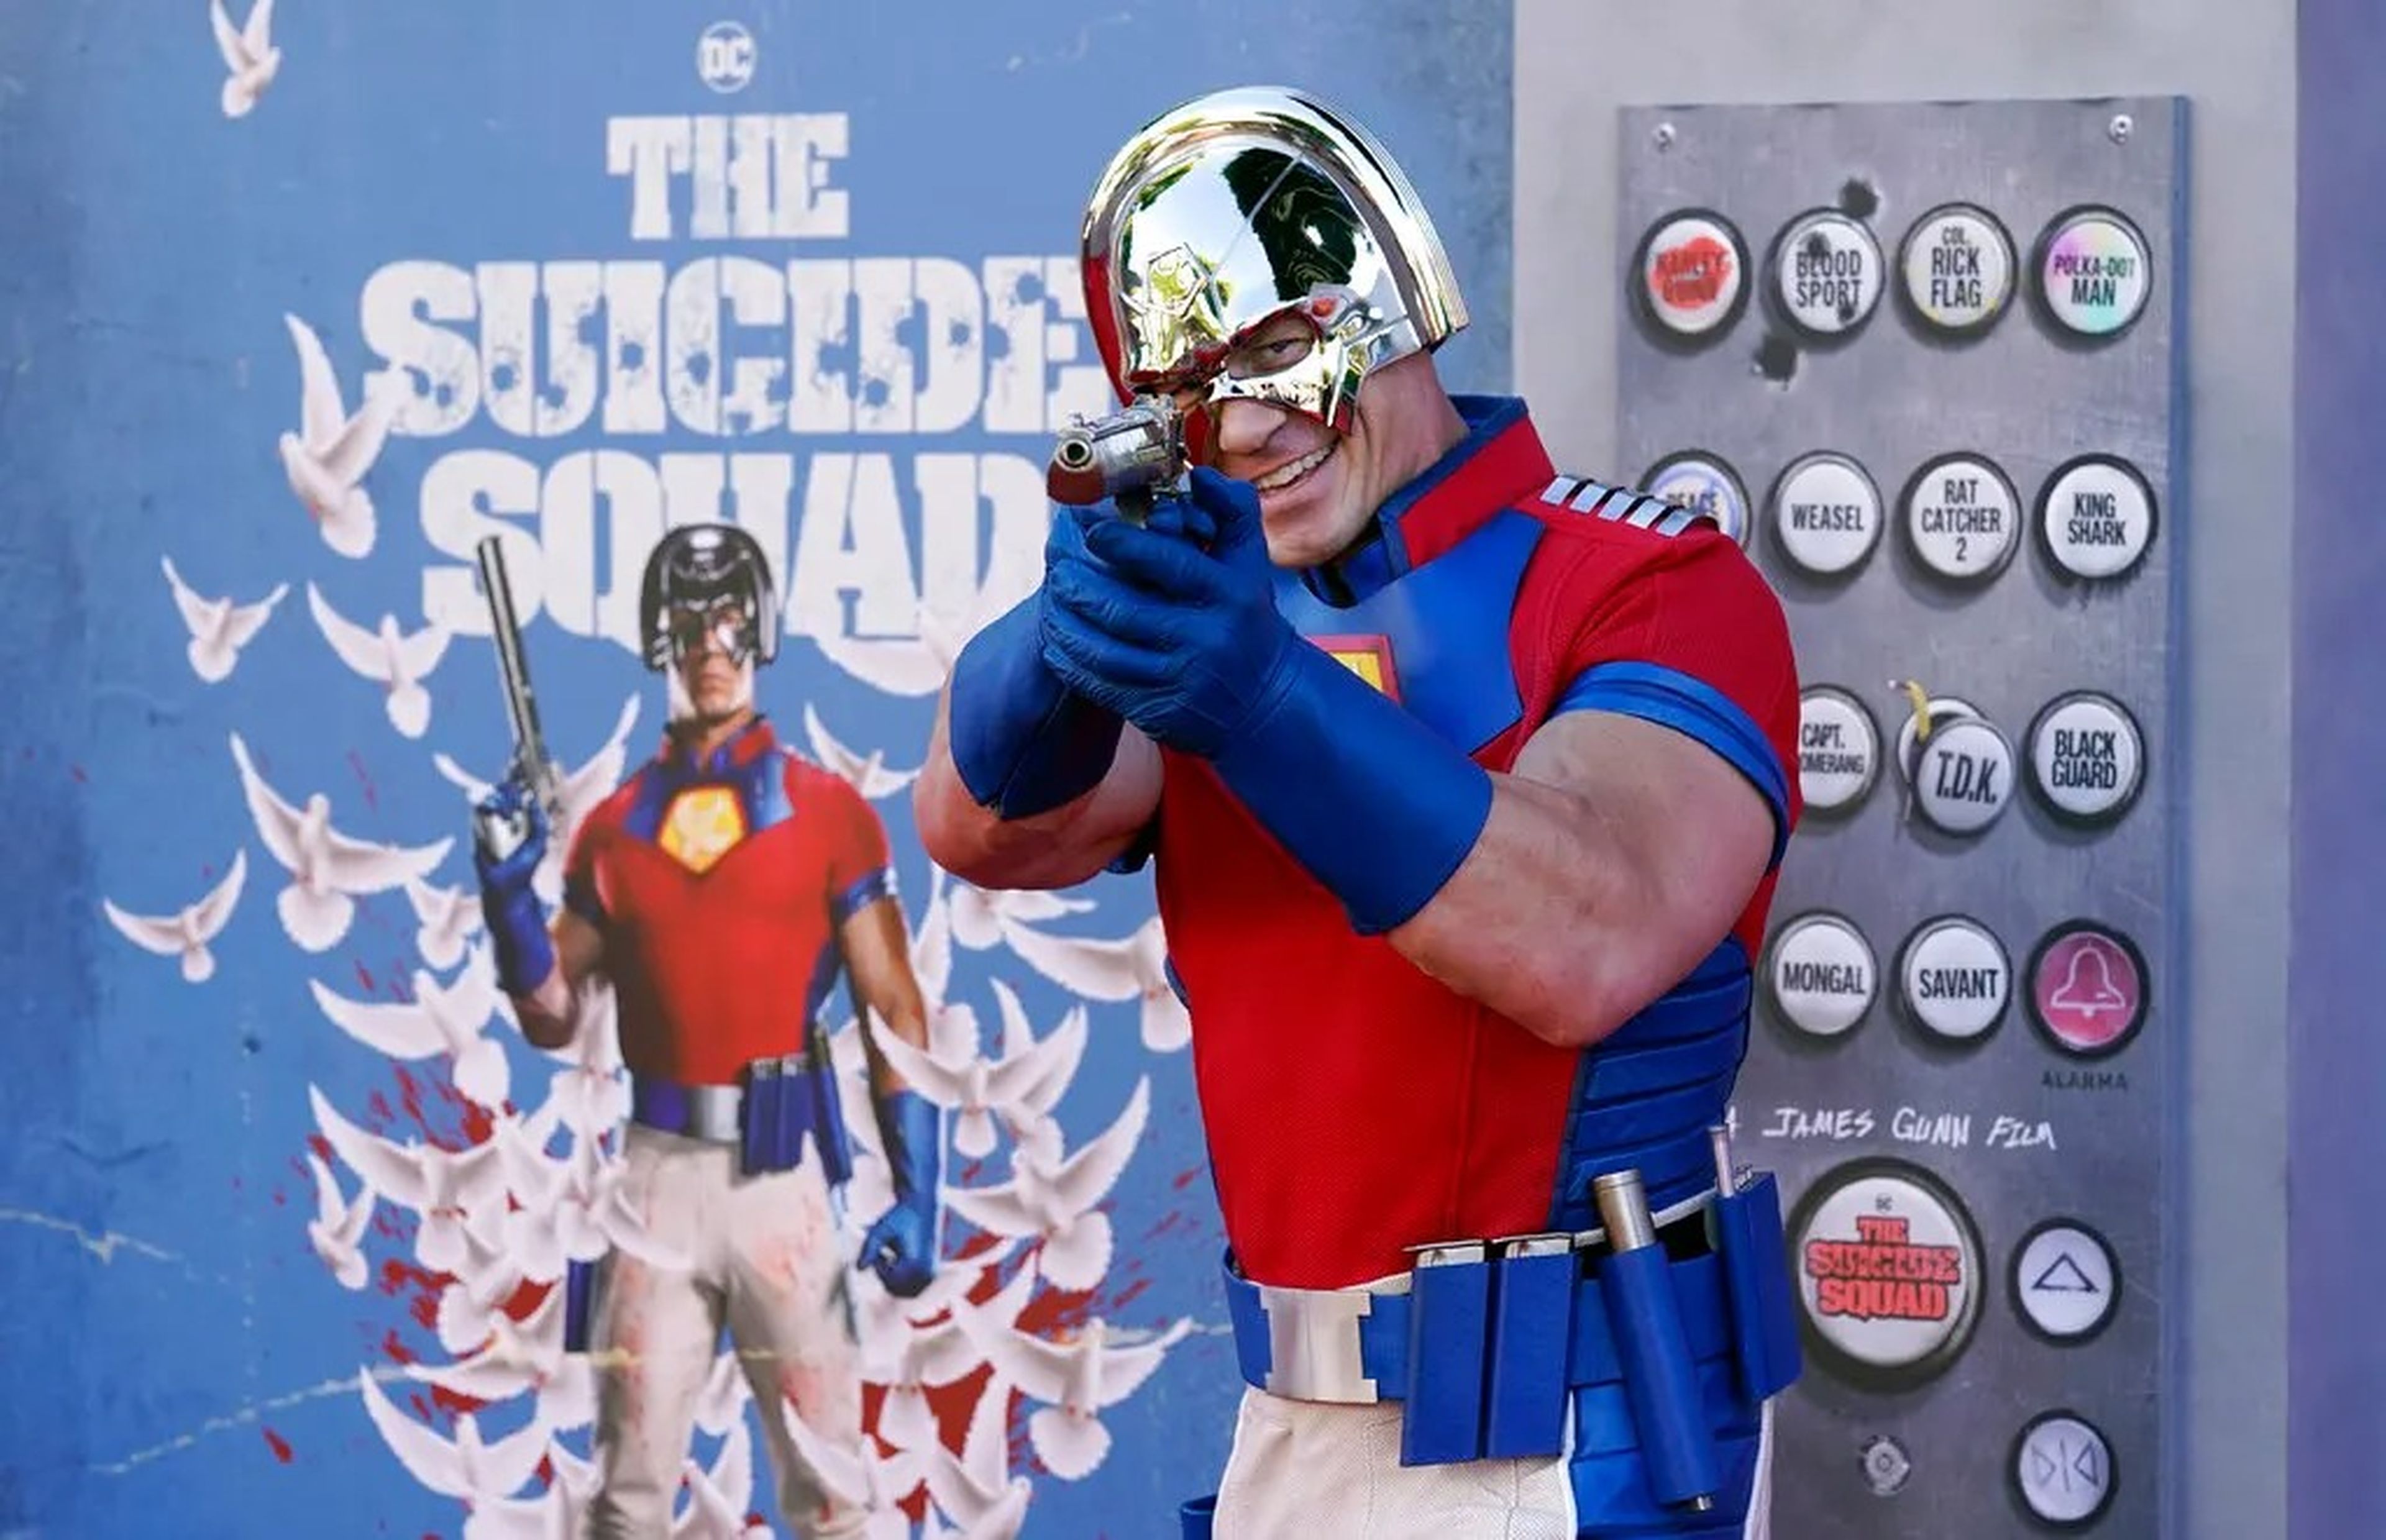 John Cena, a cast member in "The Suicide Squad," poses in front of a poster.